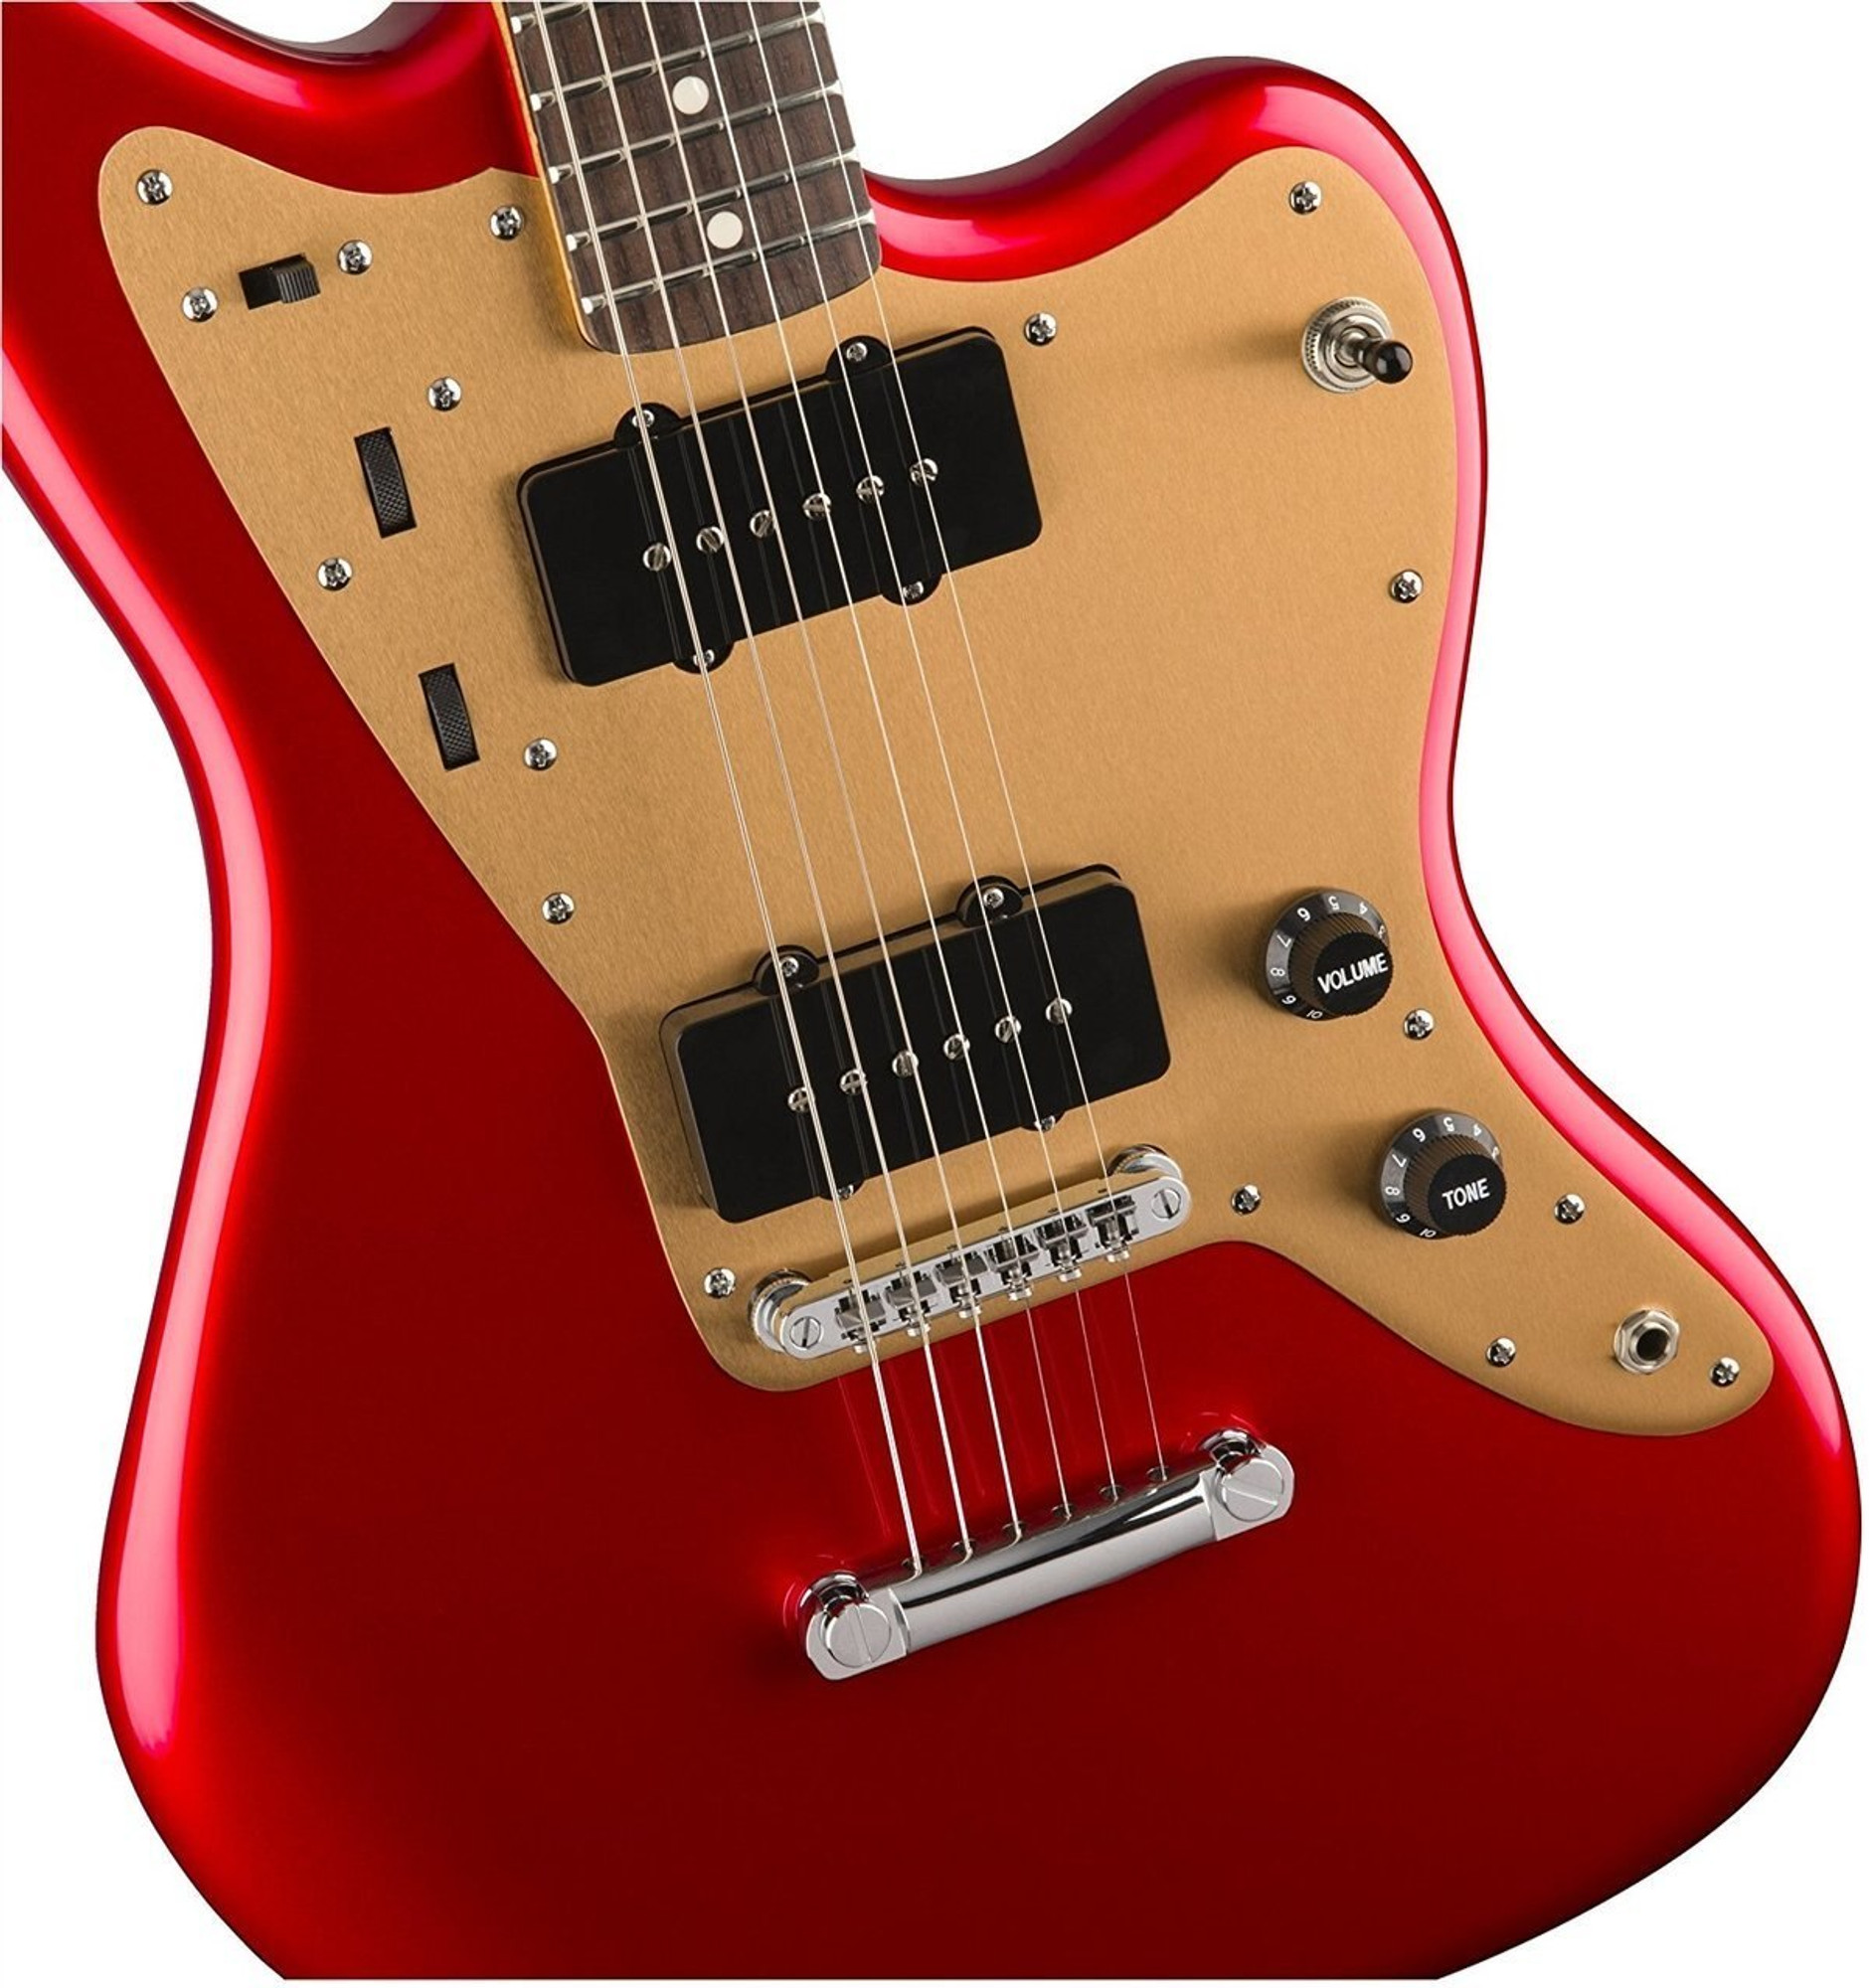 Squier Deluxe Jazzmaster, Red Hard Tail Rosewood FB   ALAMO